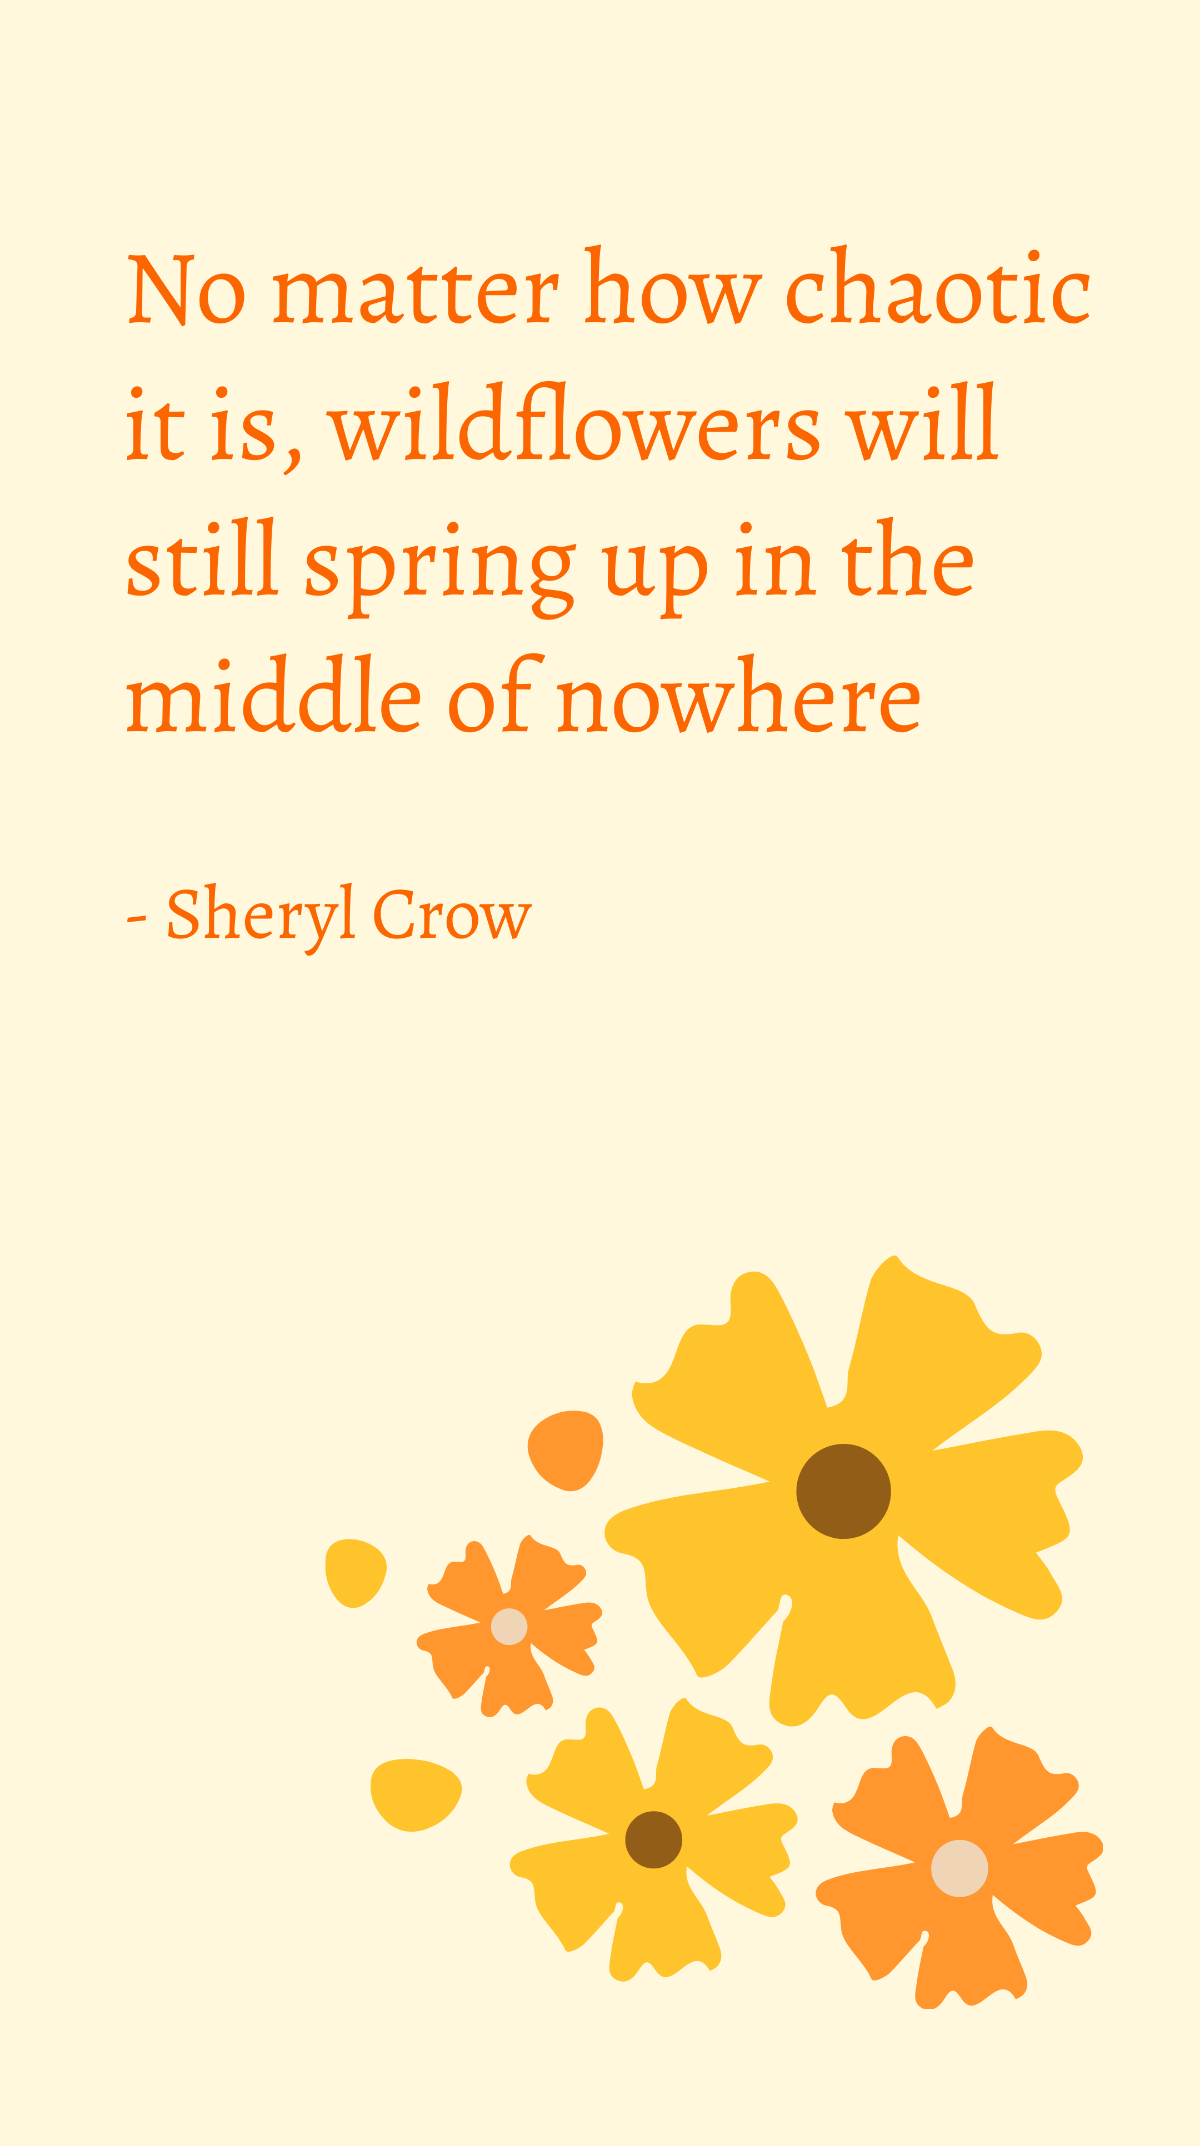 Sheryl Crow - No matter how chaotic it is, wildflowers will still spring up in the middle of nowhere Template